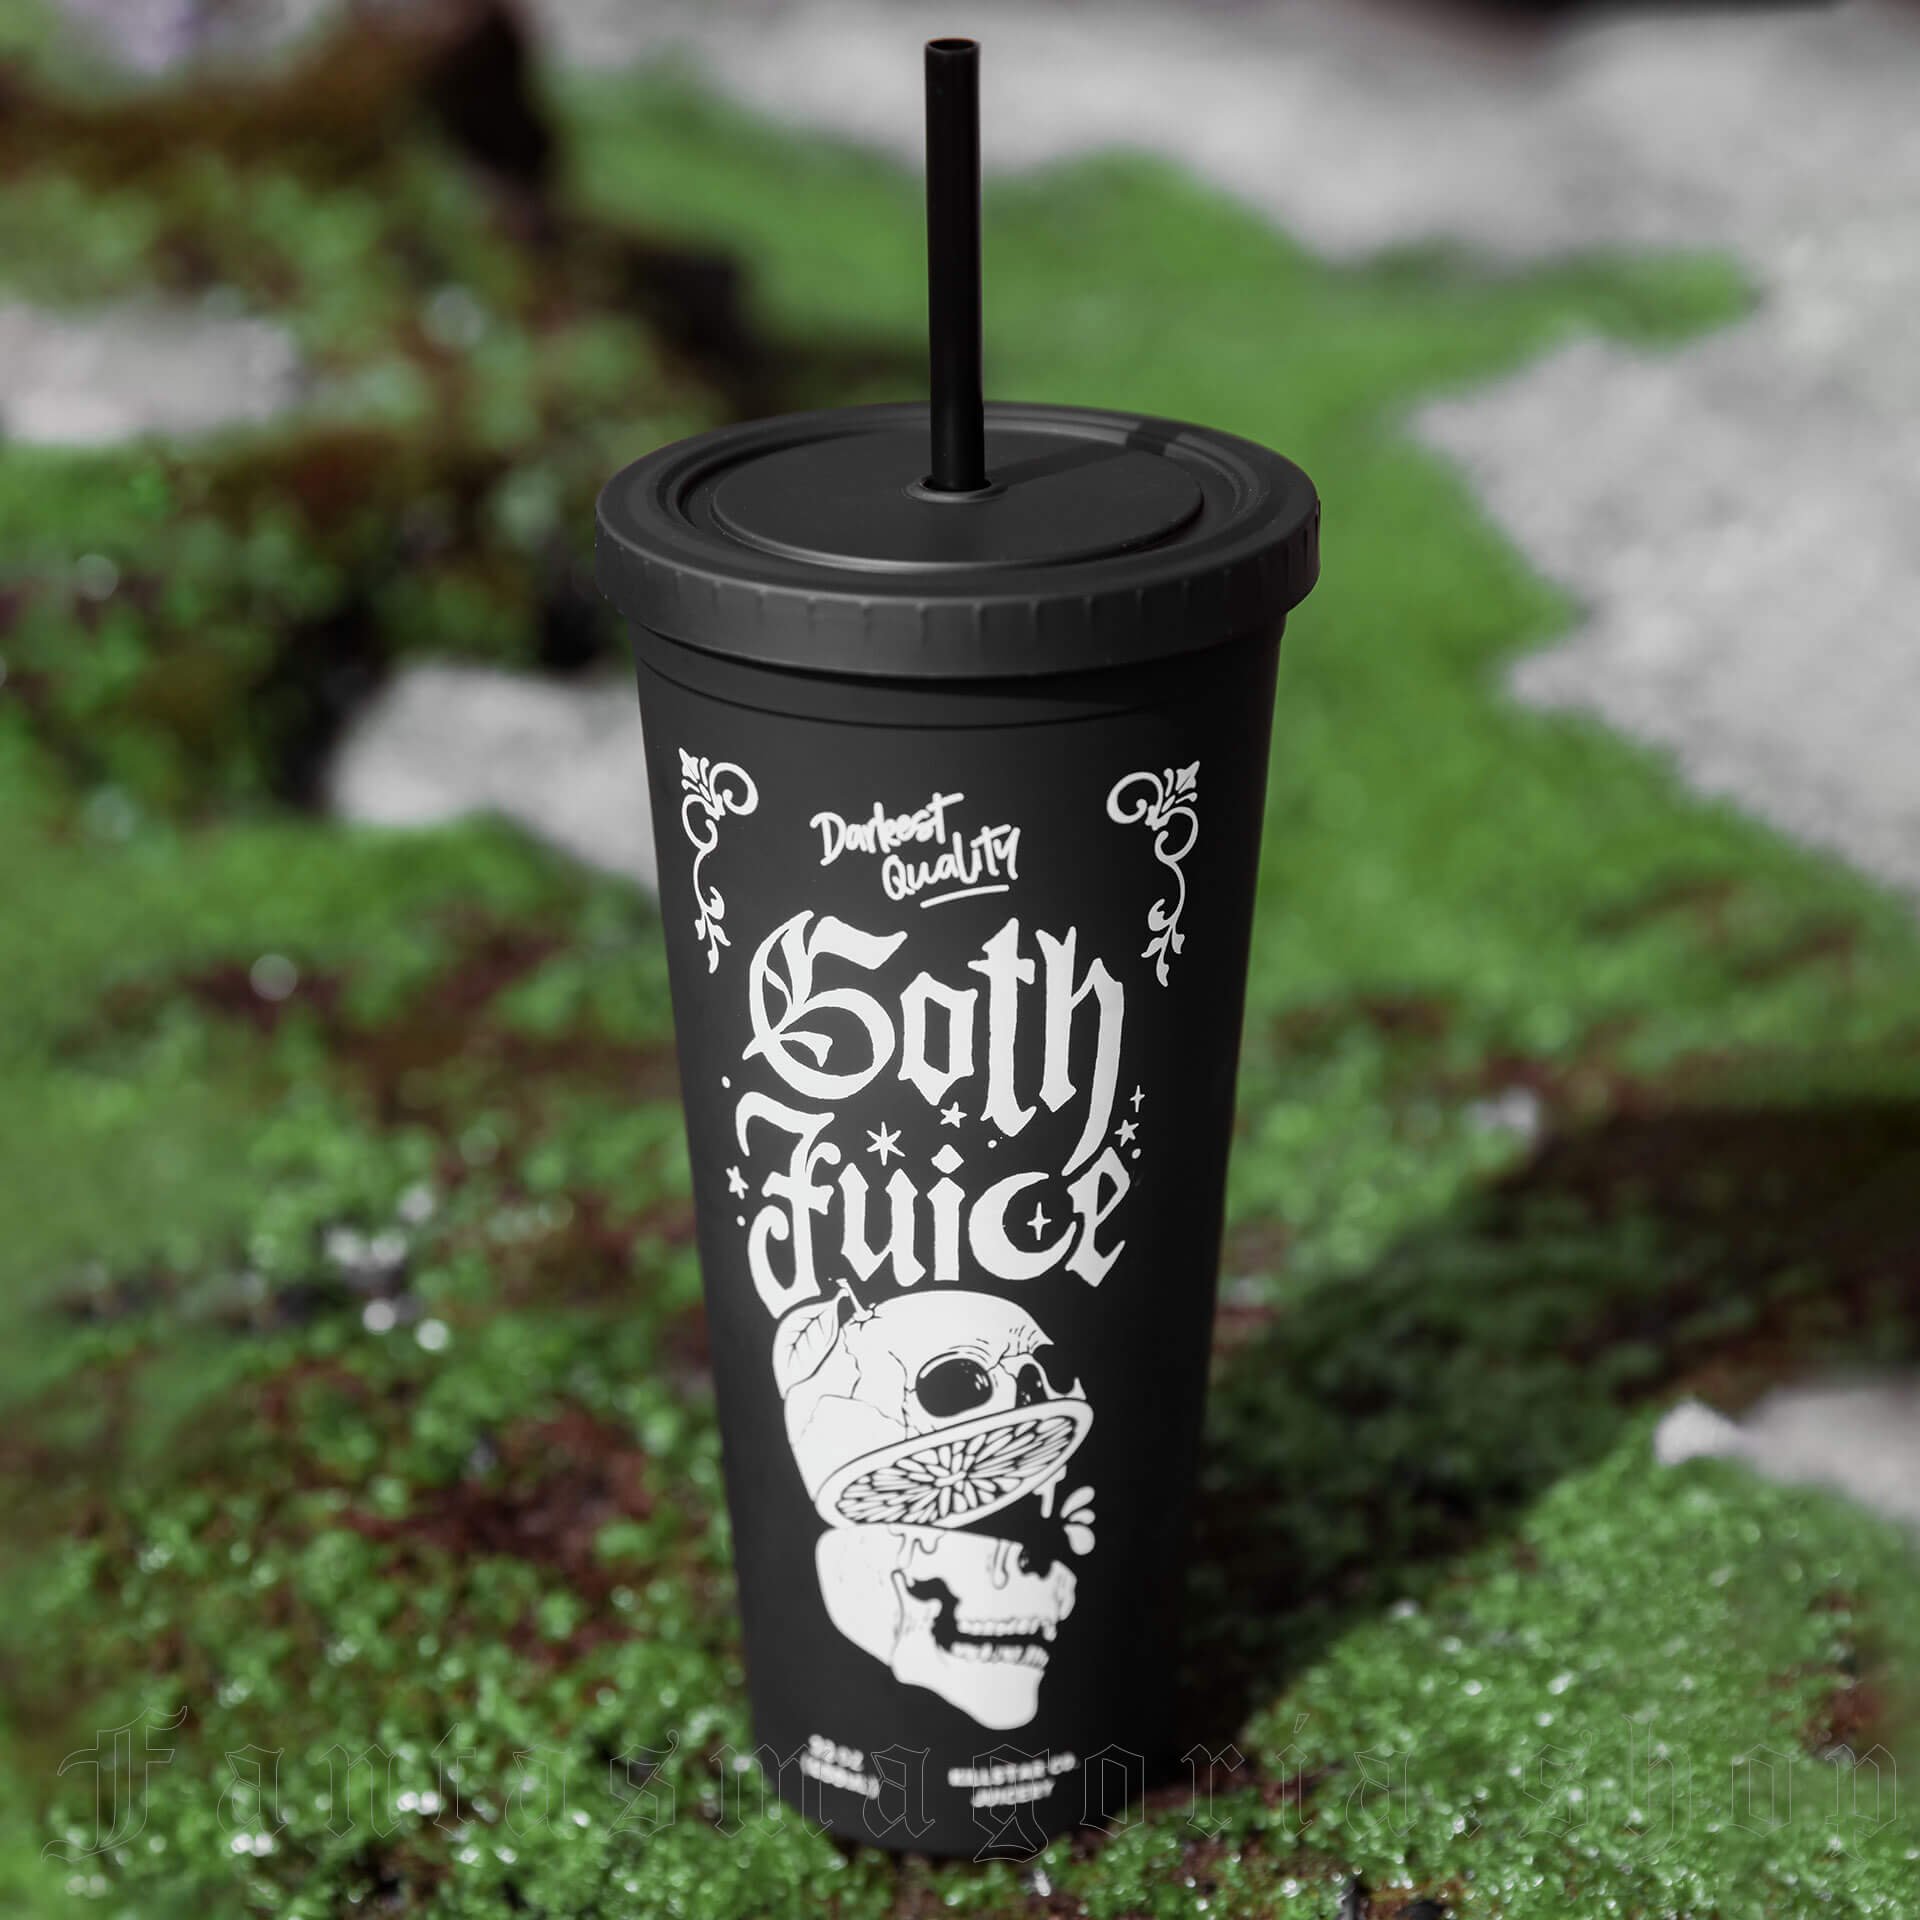 Goth Juice Cold Brew Cup  Cold brew, Cups and mugs, Goth kitchen